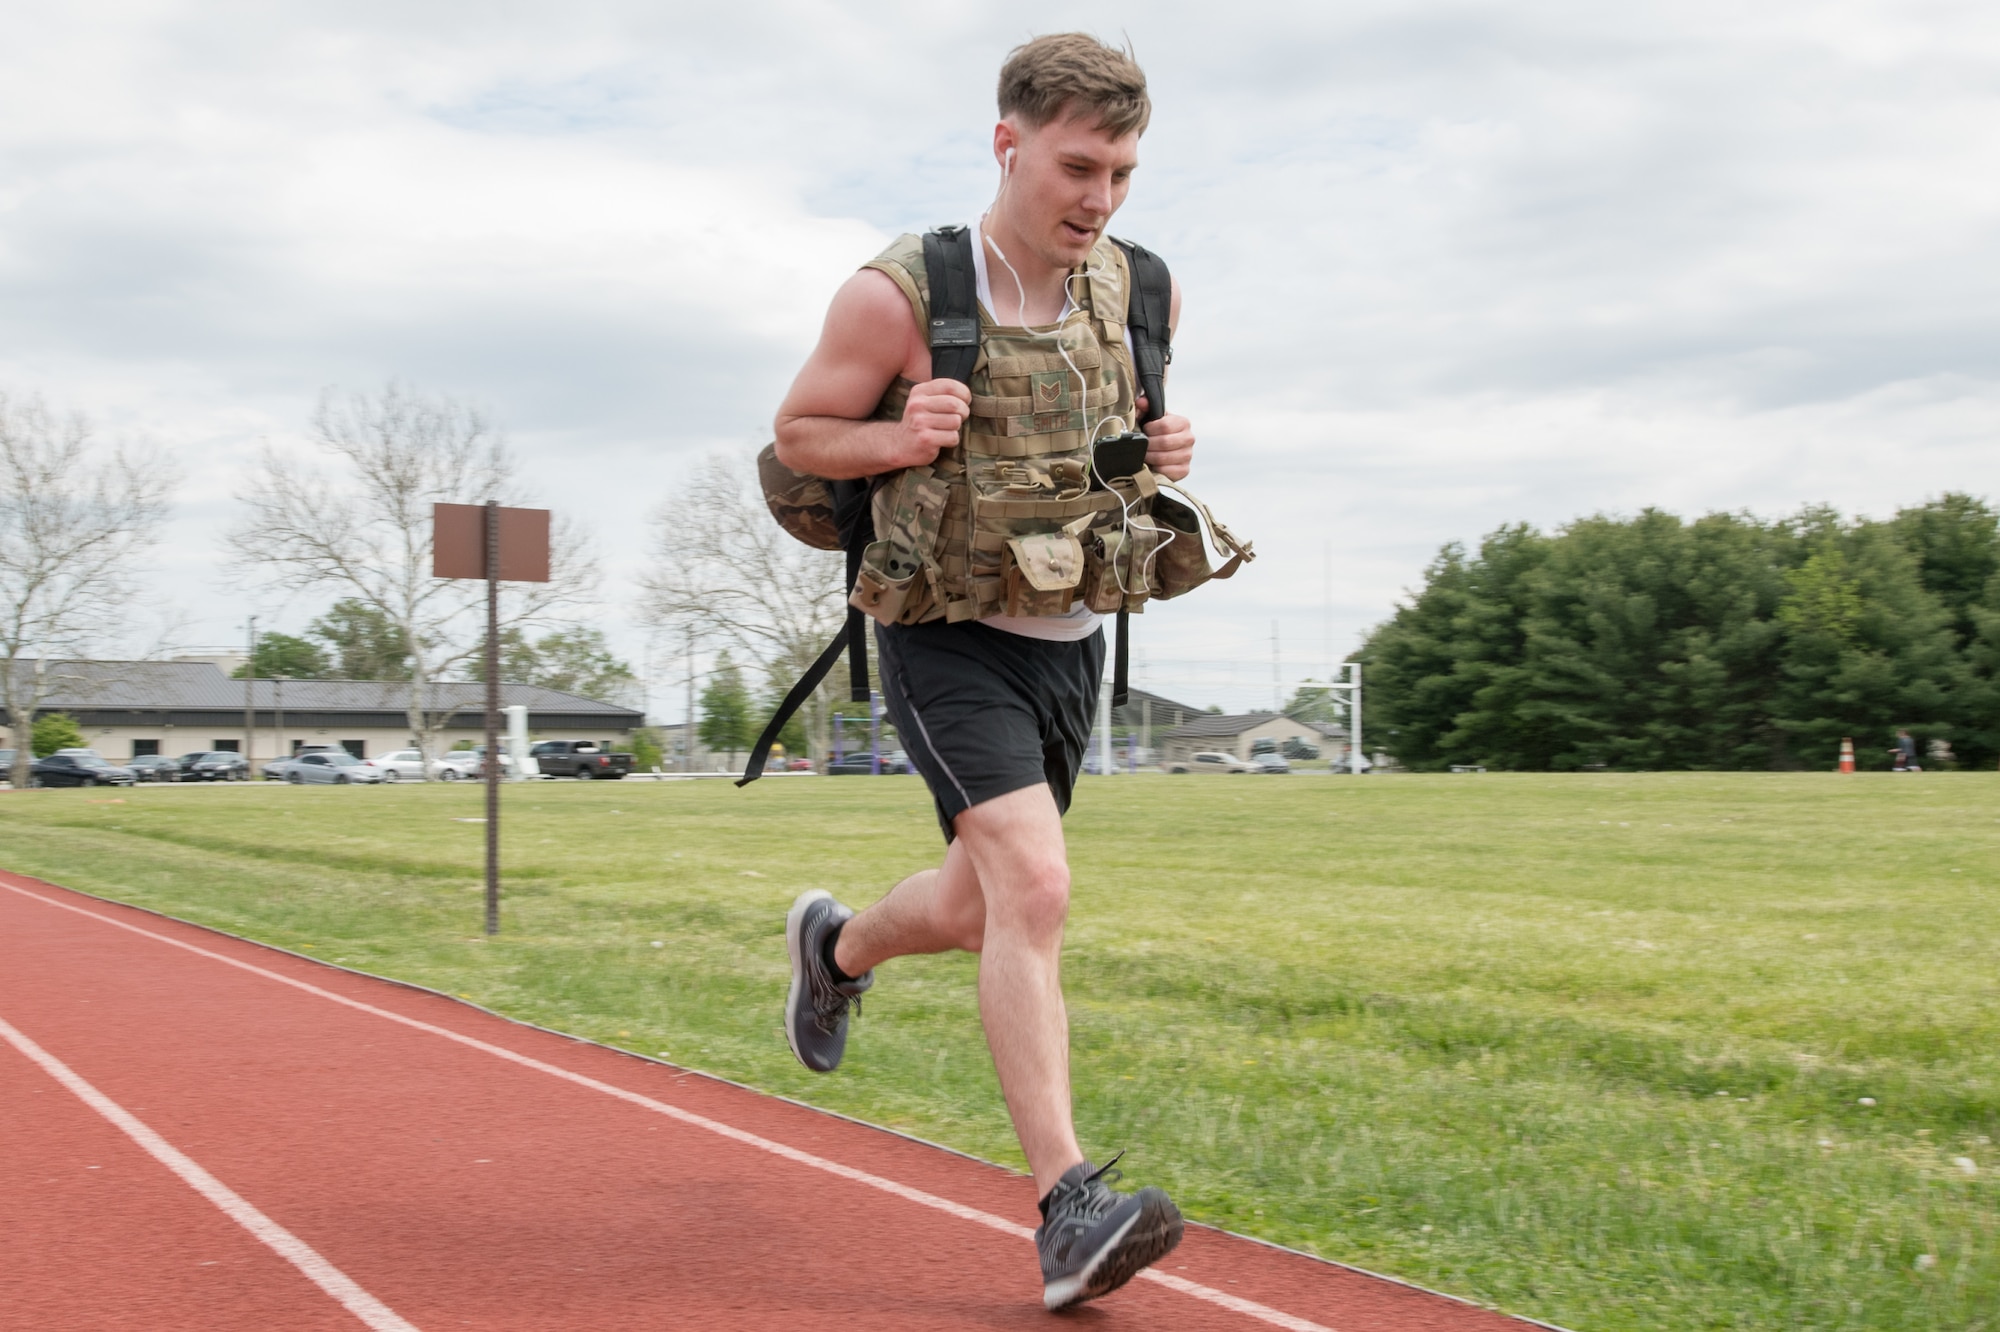 Staff Sgt. Stephen Smith, 436th Security Forces Squadron response force member, runs while wearing body armor and carrying a ruck during the 2020 Police Week Ruck March May 14, 2020, at Dover Air Force Base, Delaware. The 436th SFS hosted the 24-hour event commemorating fallen military and civilian law enforcement officers. (U.S. Air Force photo by Mauricio Campino)